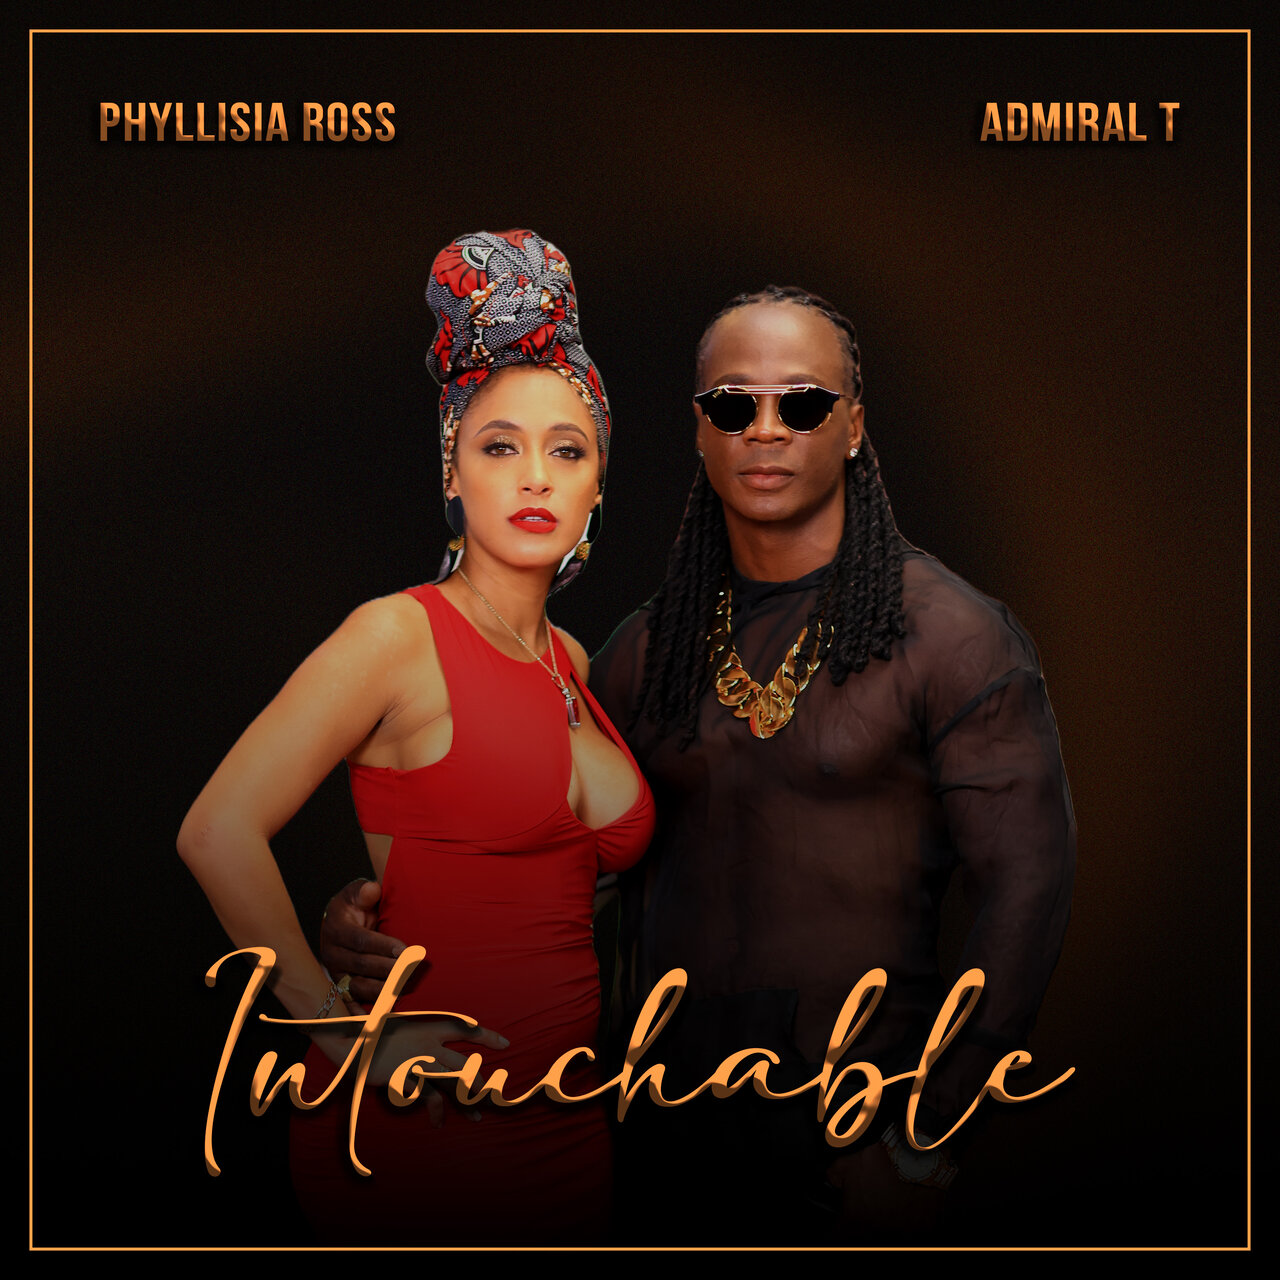 Admiral T - Intouchable (ft. Phyllisia Ross) (Cover)